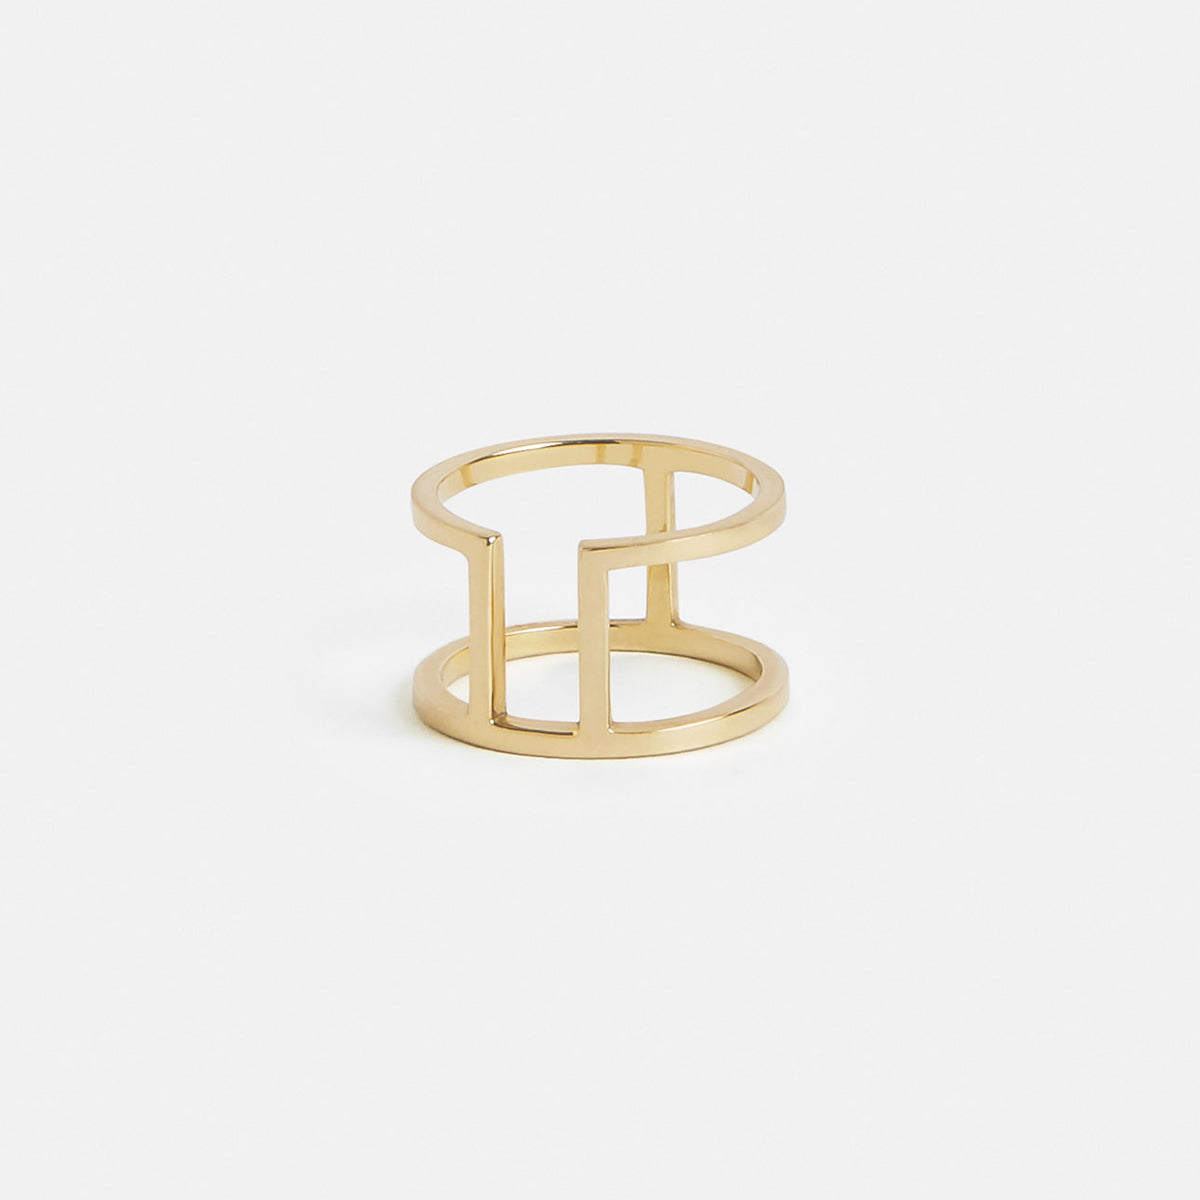 Cote Alternative Ring in 14k Gold by SHW Fine Jewelry NYC